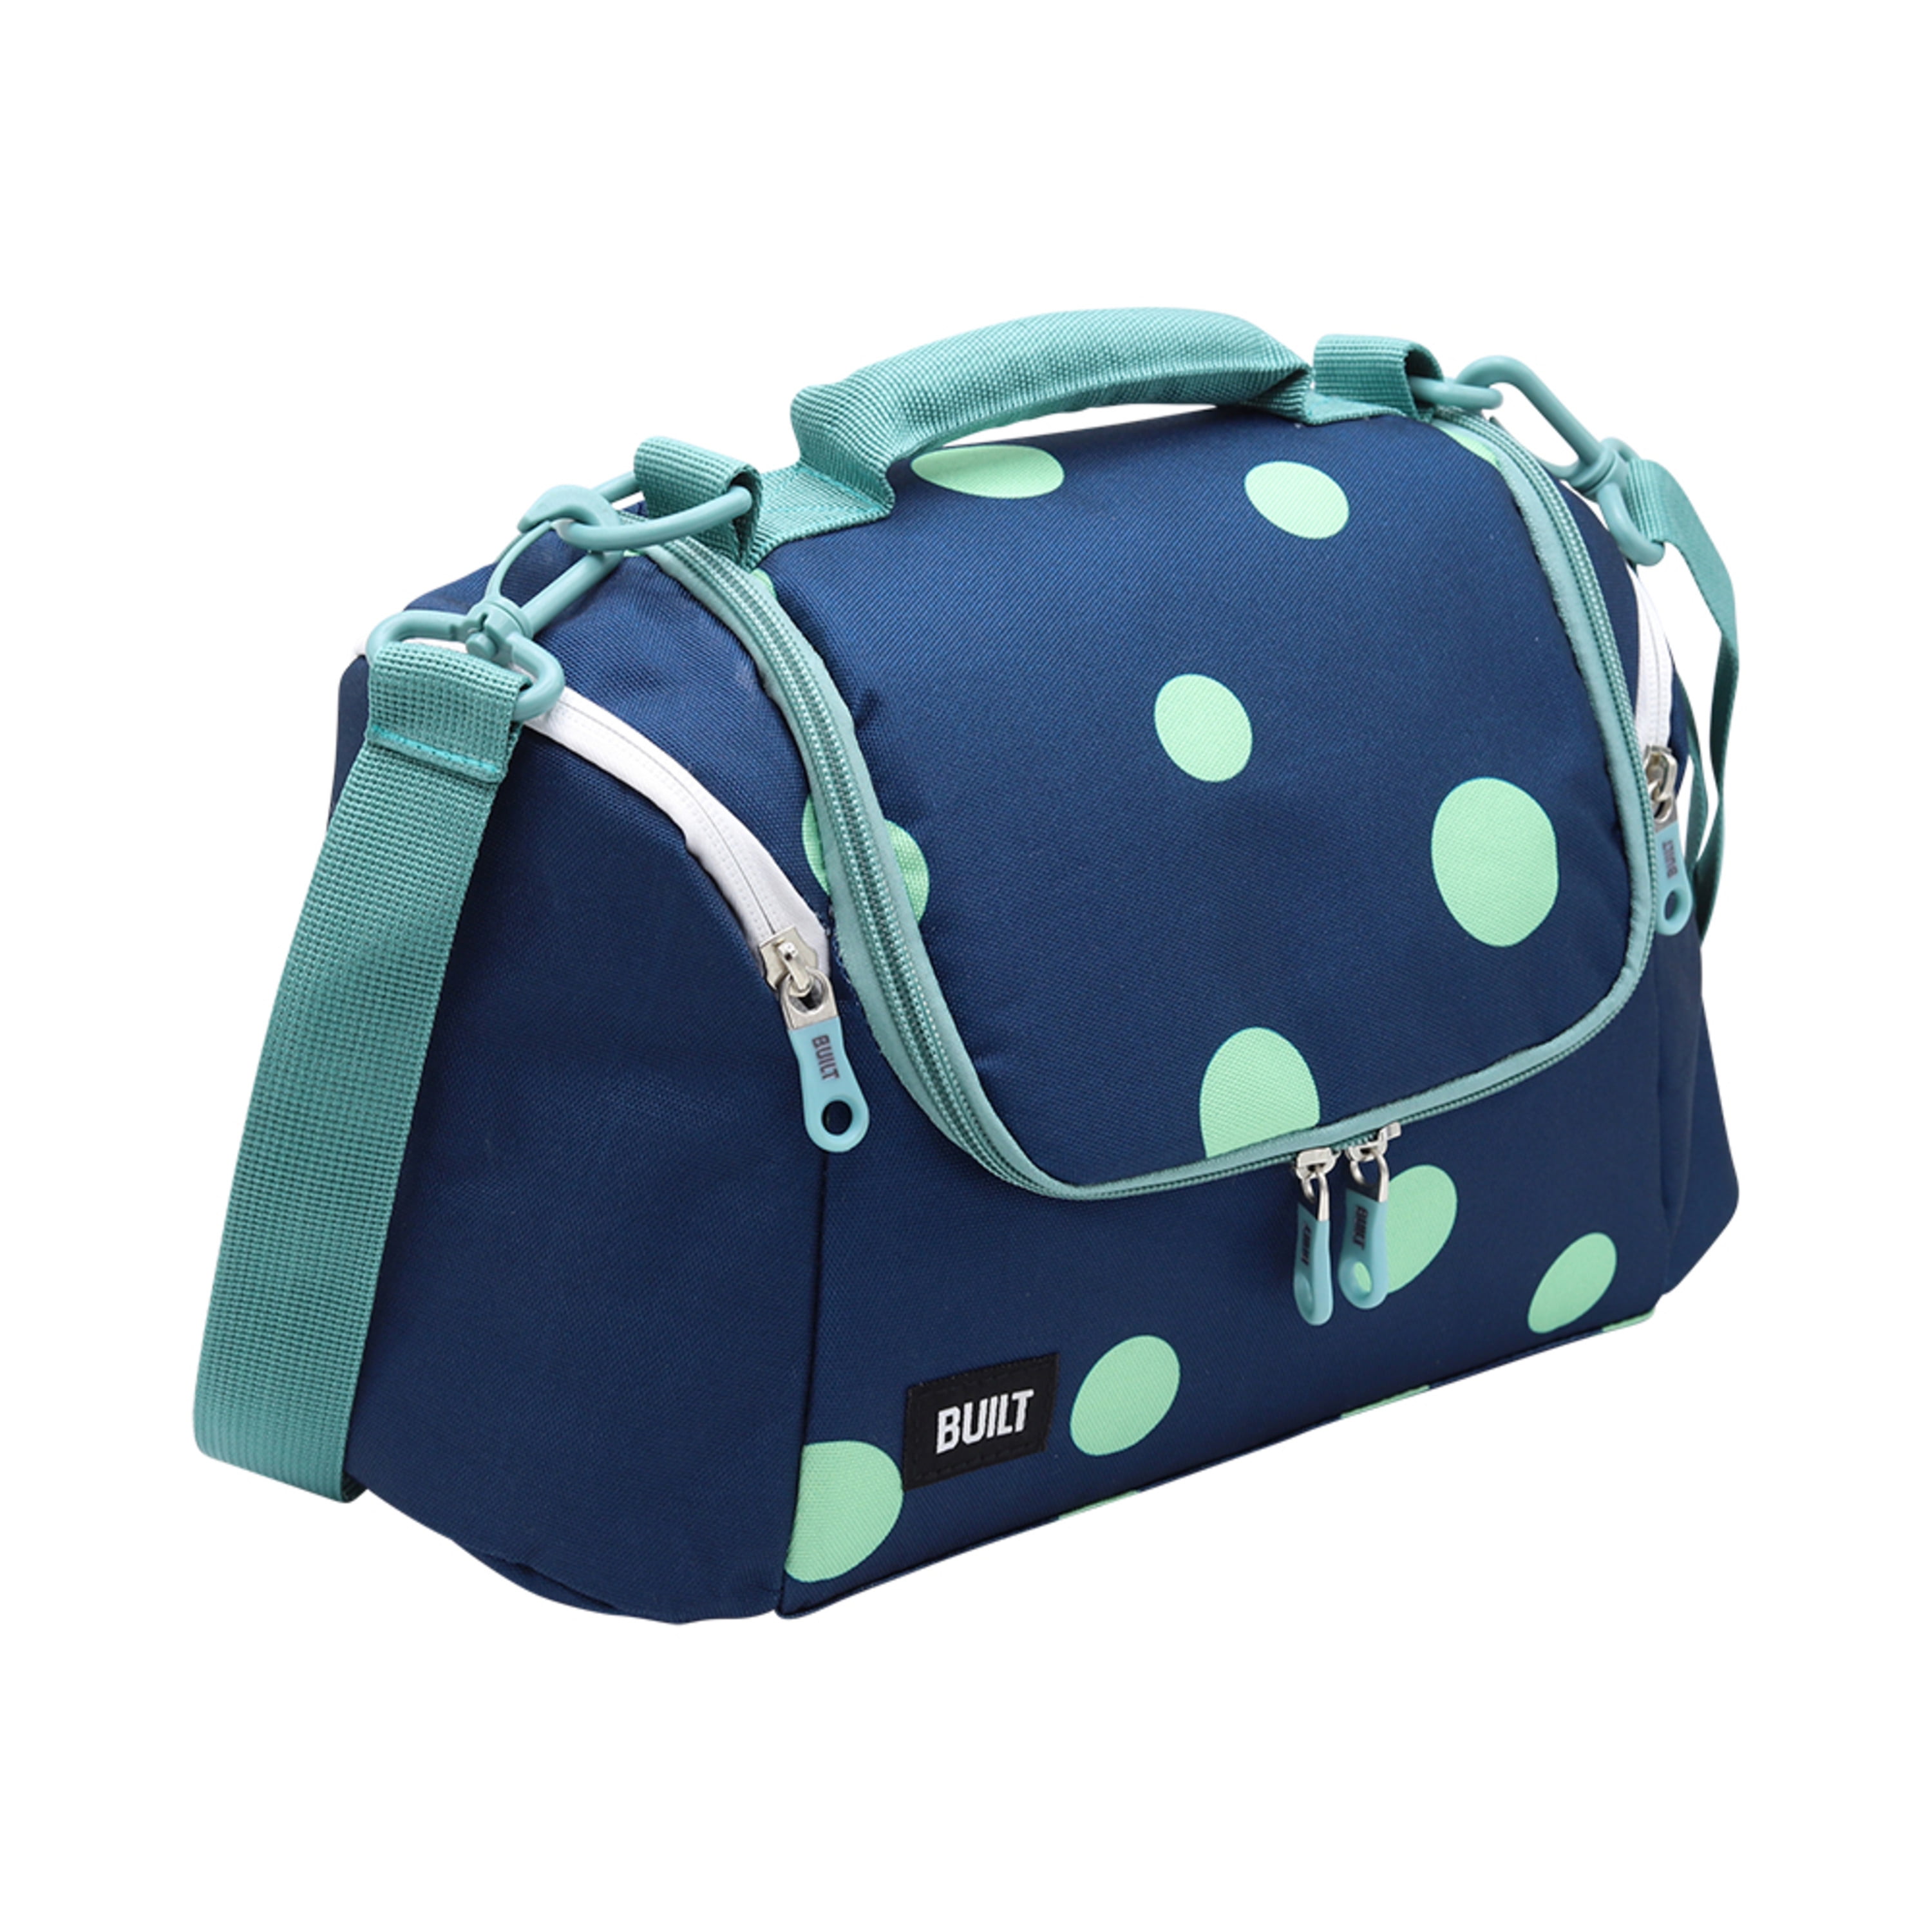 Checkered Insulated Lunch Bag for Boys, Green/Blue